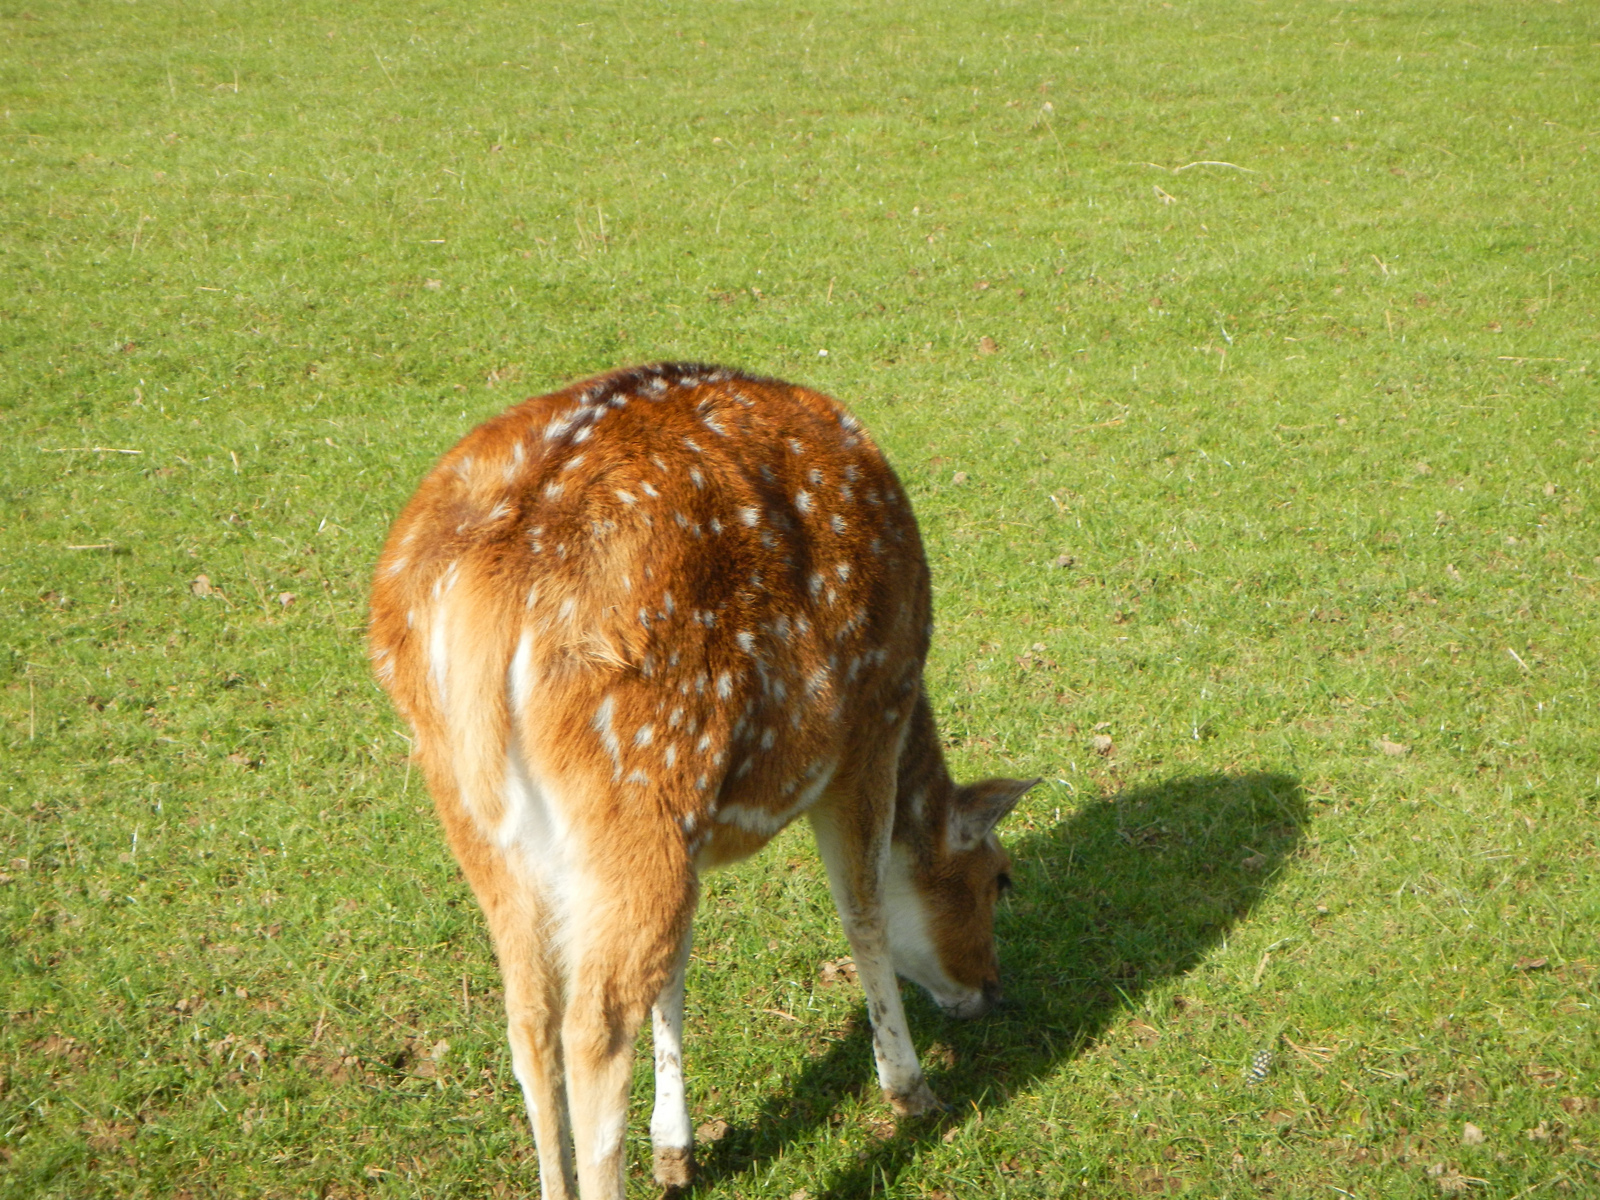  ​Sunny, the deer. We met her before we had paid admission and didn't have the bag of feed. She was friendly, until she realized that we didn't have pellets for her. 